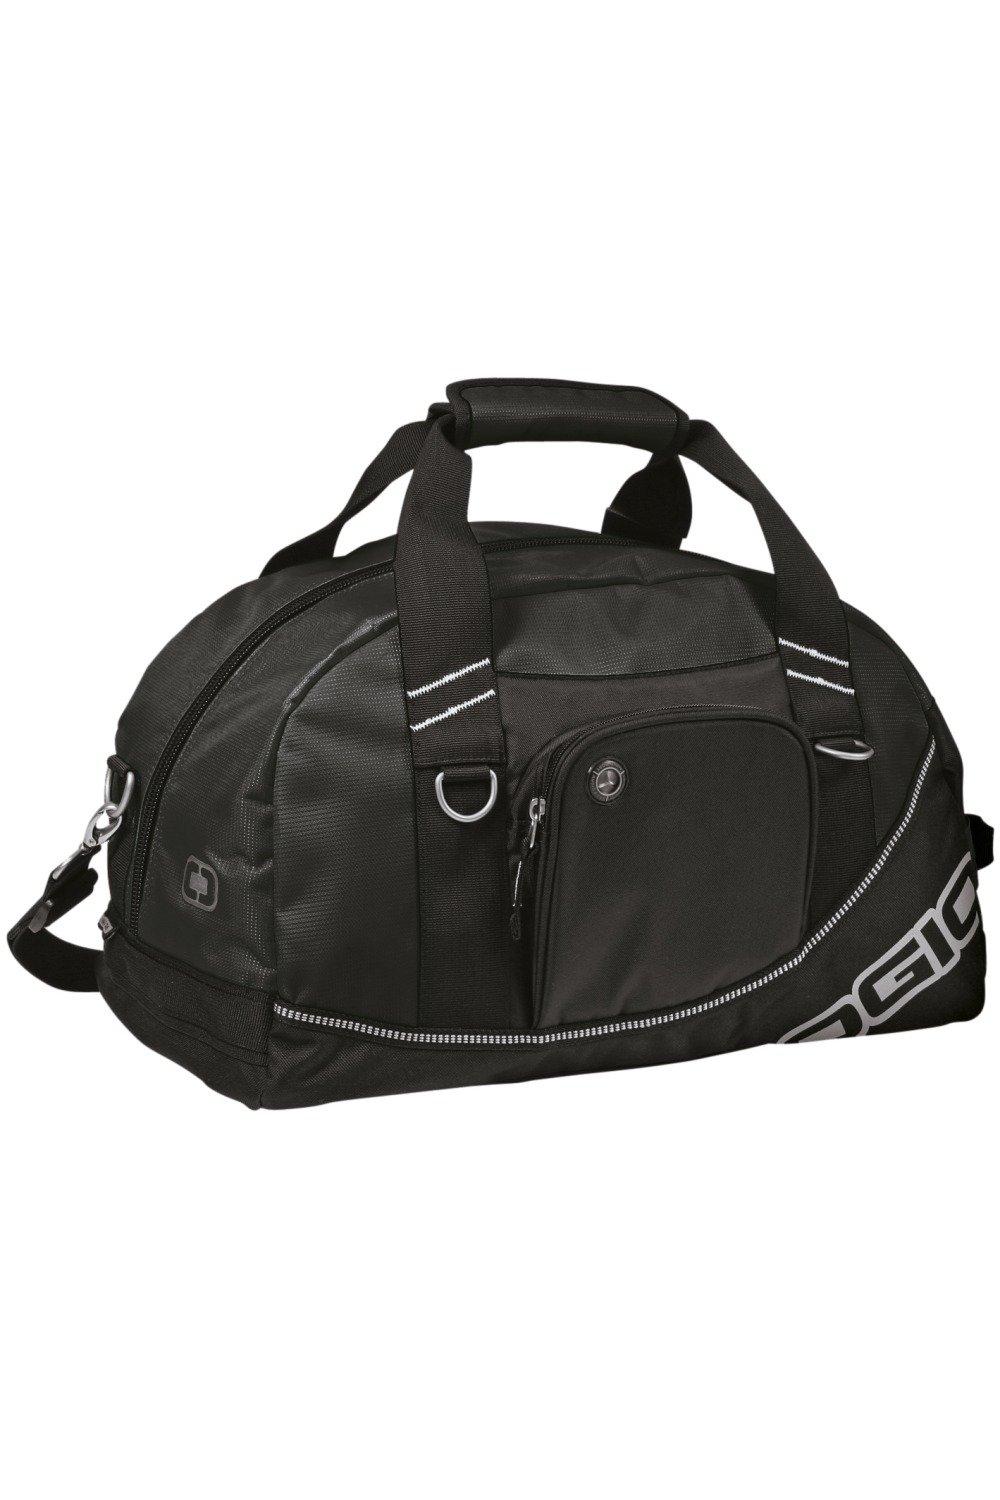 Half Dome Sports Gym Duffle Bag (29.5 Litres) Pack of 2